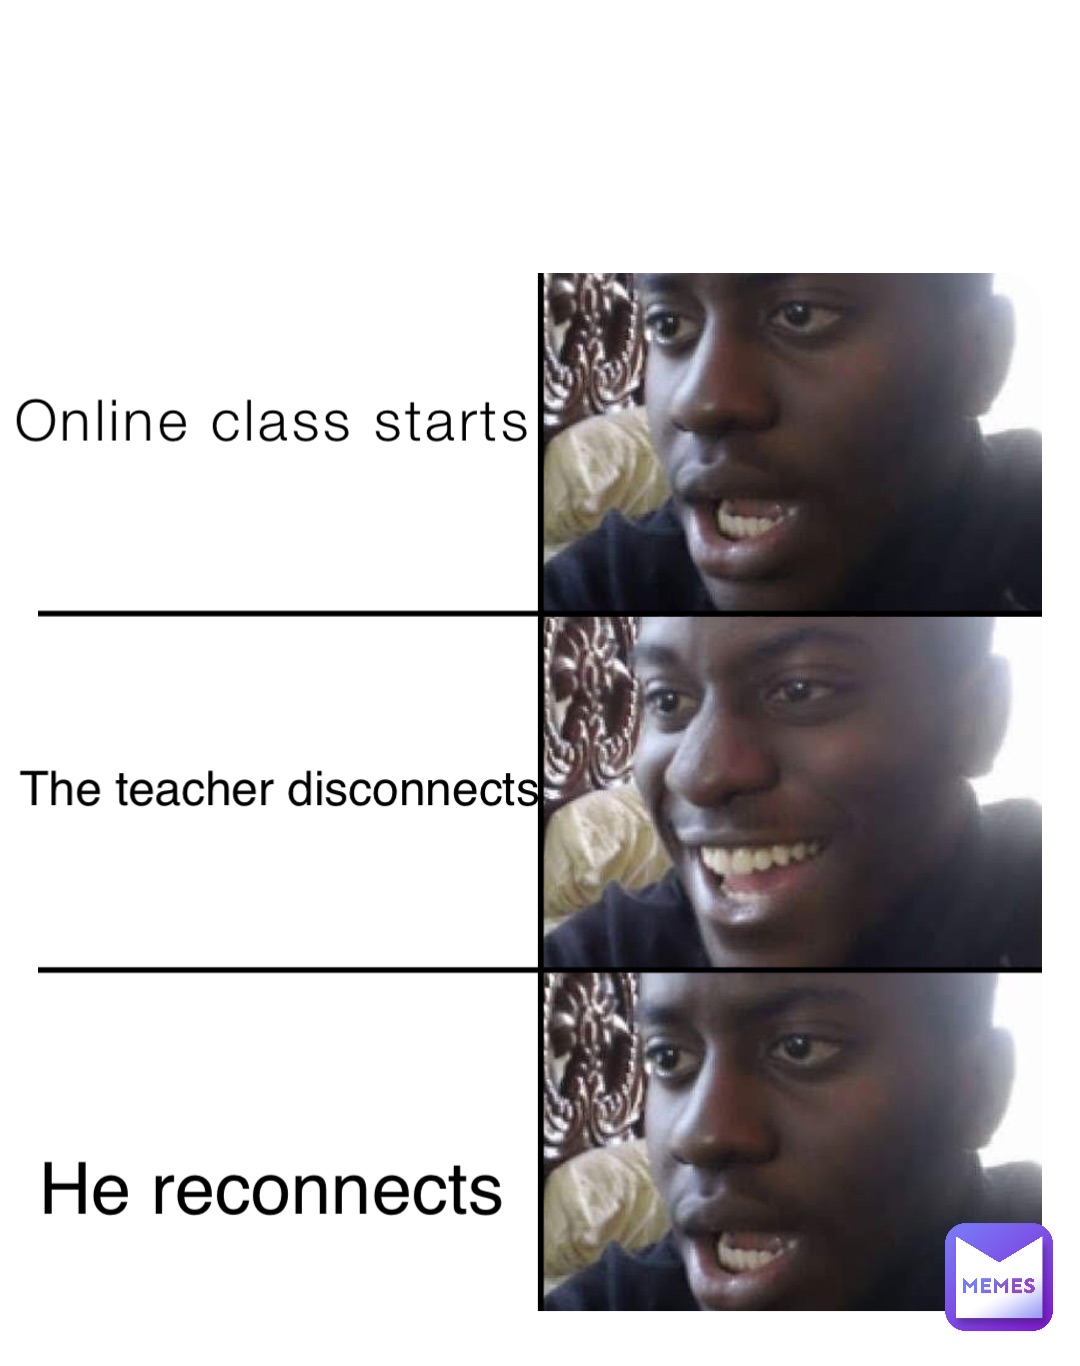 Online class starts The teacher disconnects He reconnects